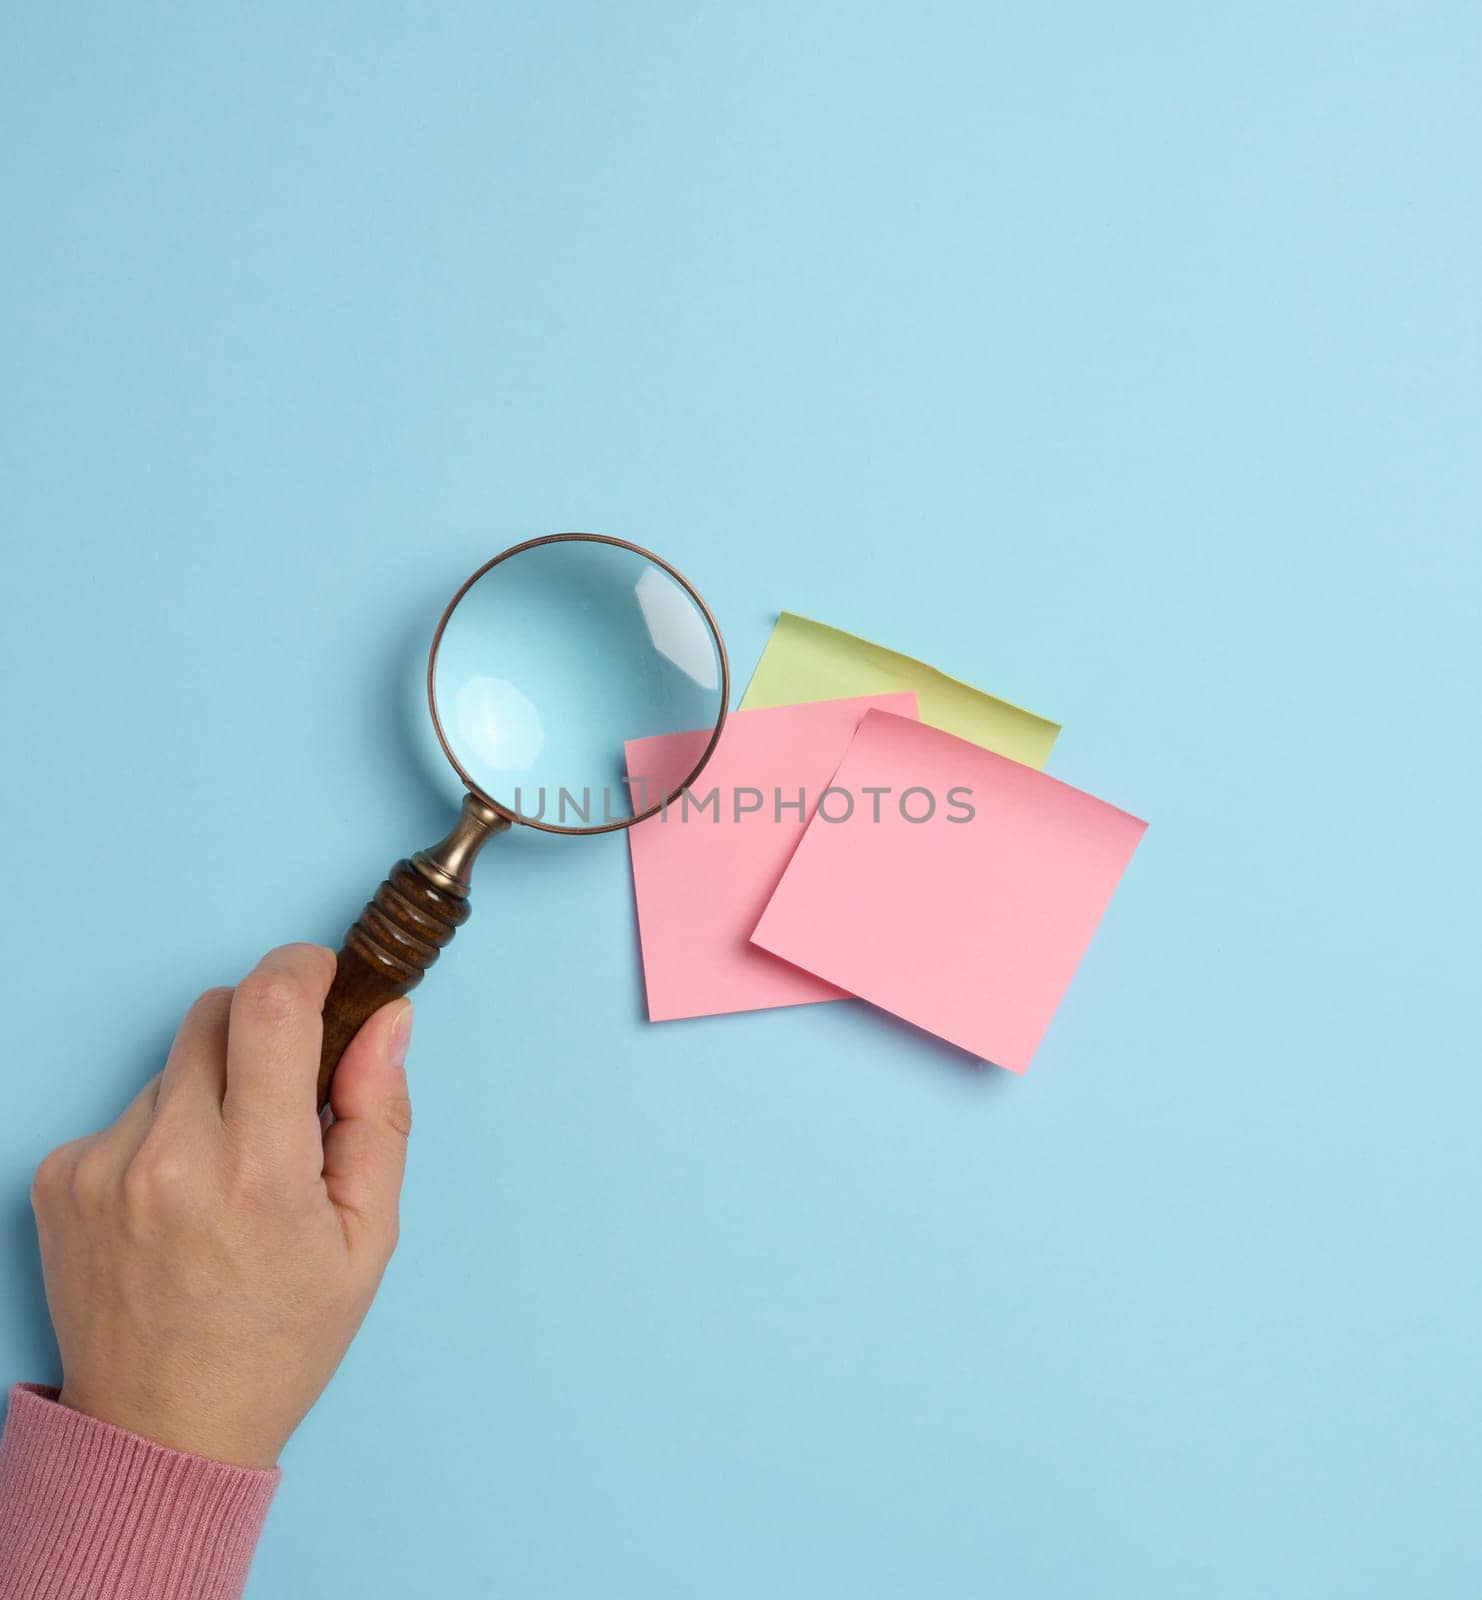 Empty paper stickers adhered to a blue background, and a female hand with a magnifying glass on a blue background